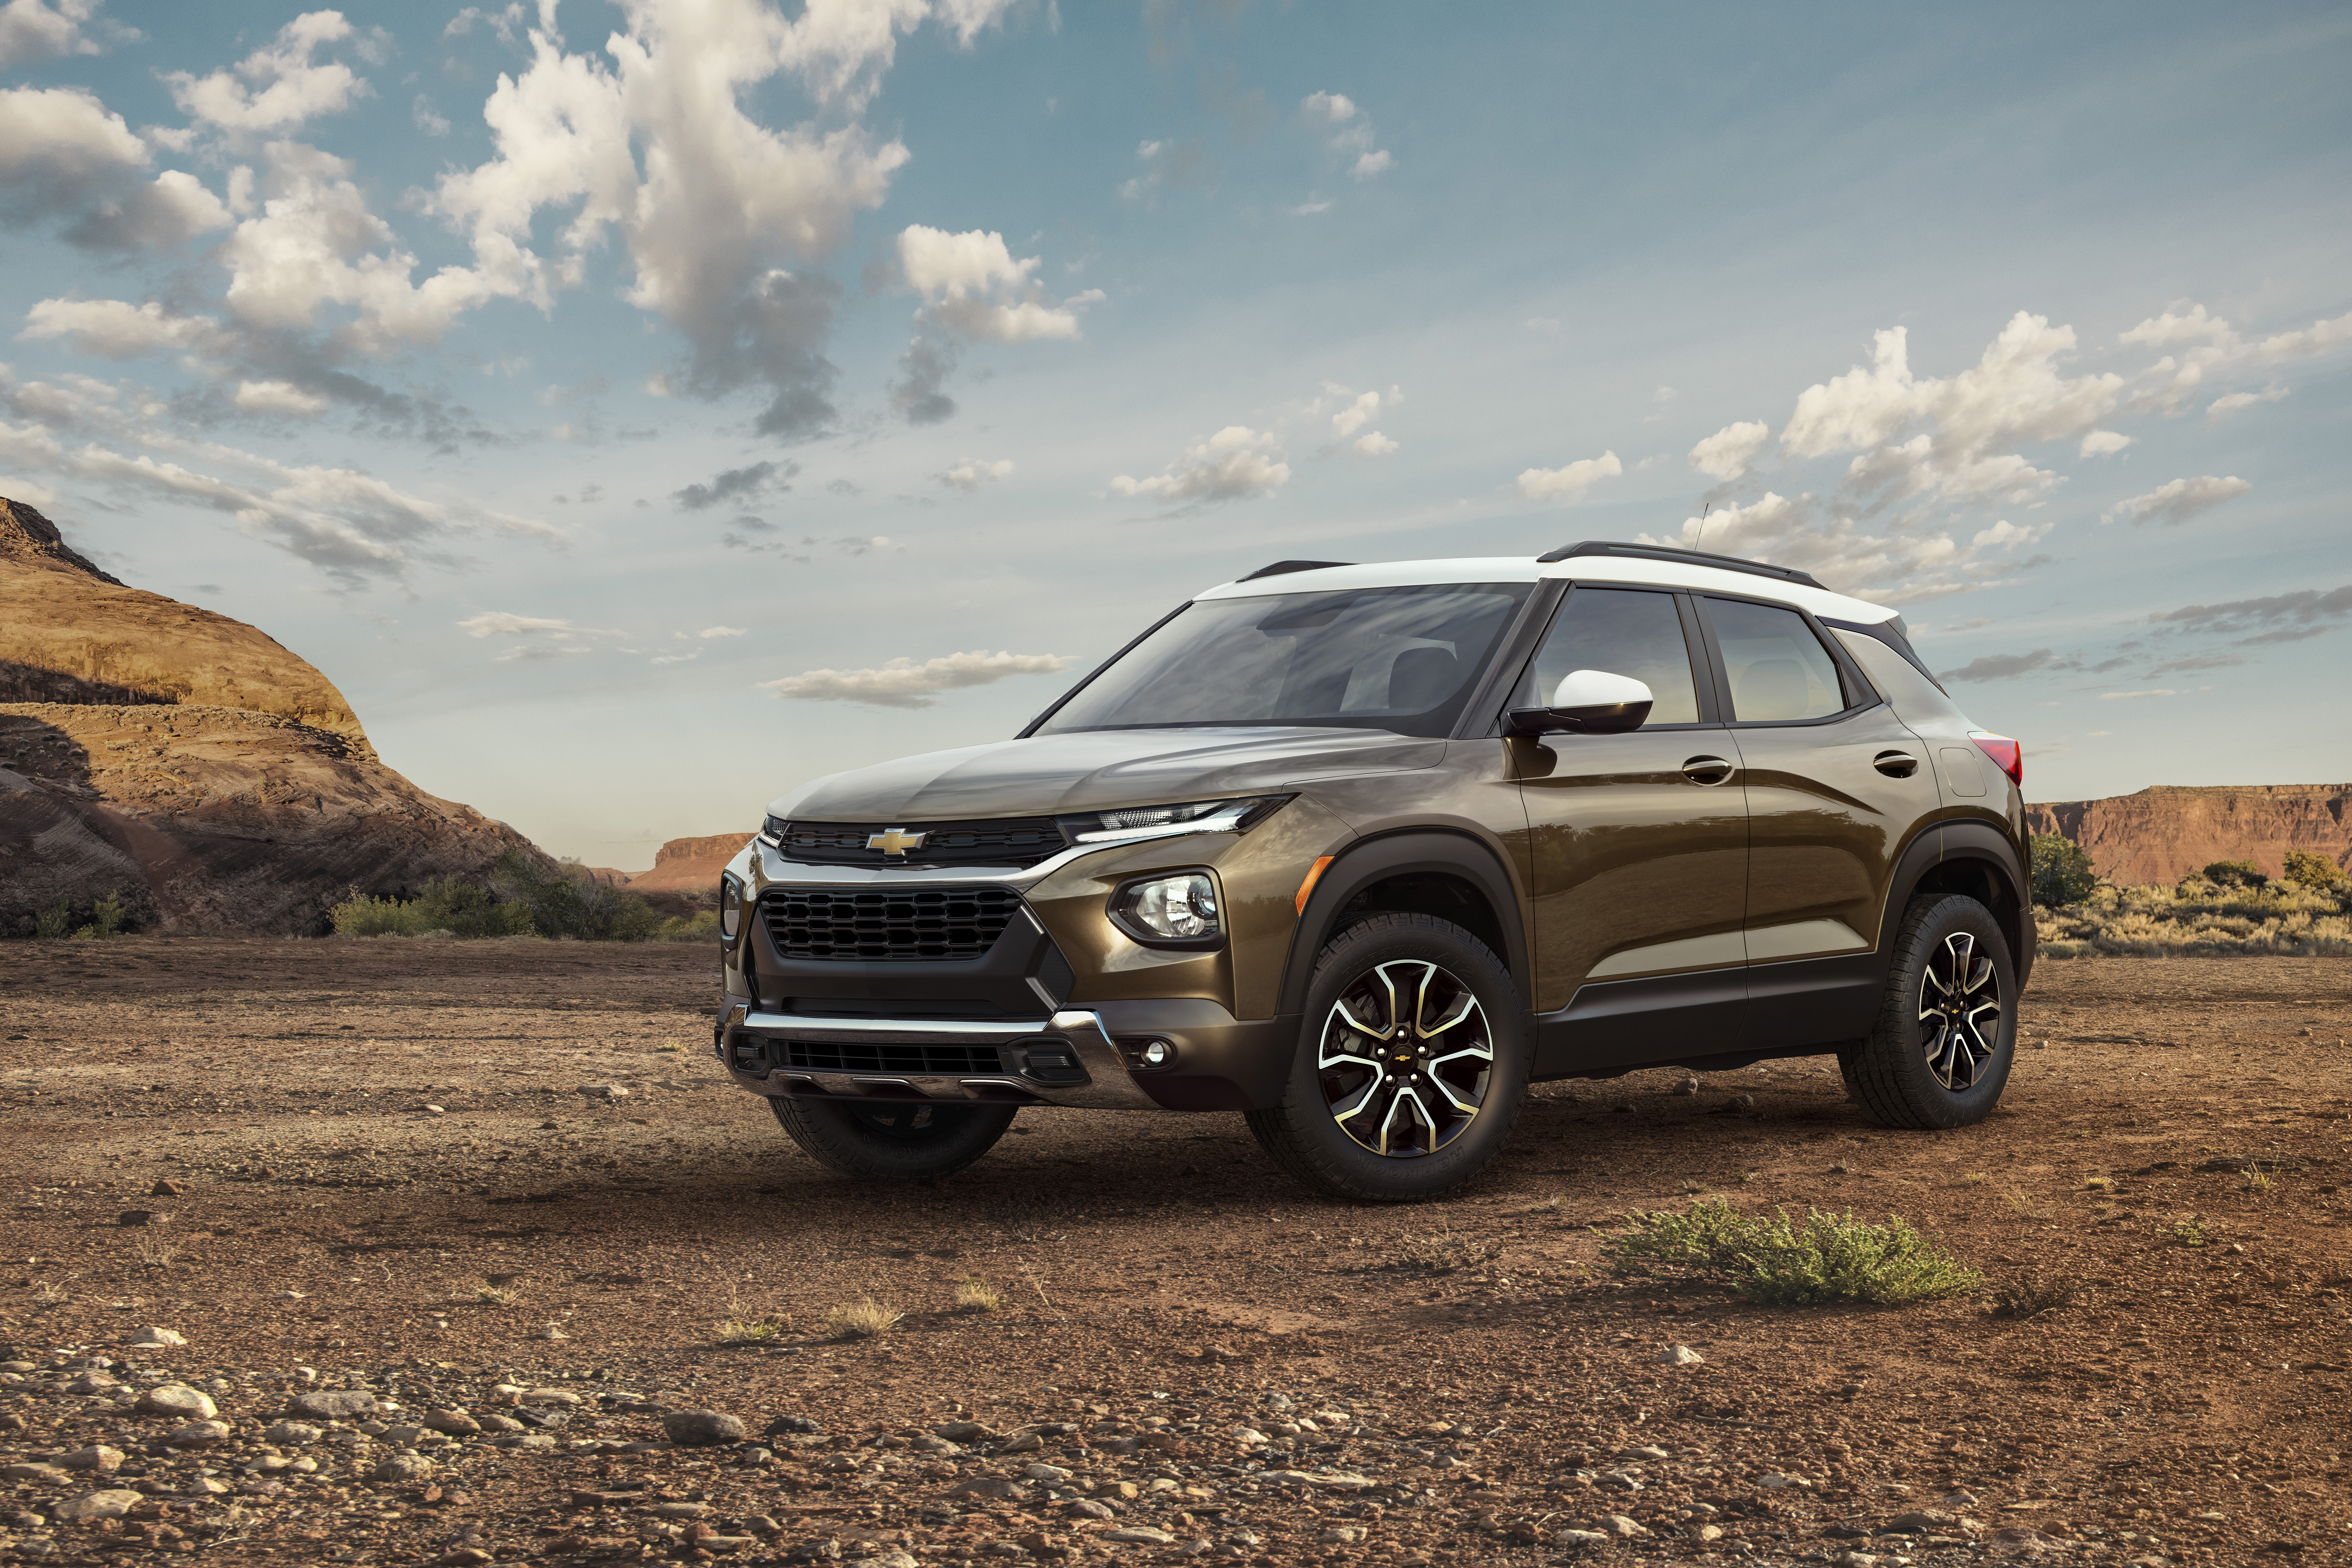 All-New Chevrolet Trailblazer SUV Brings Style, Safety and Functionality  Starting Under $20,0001